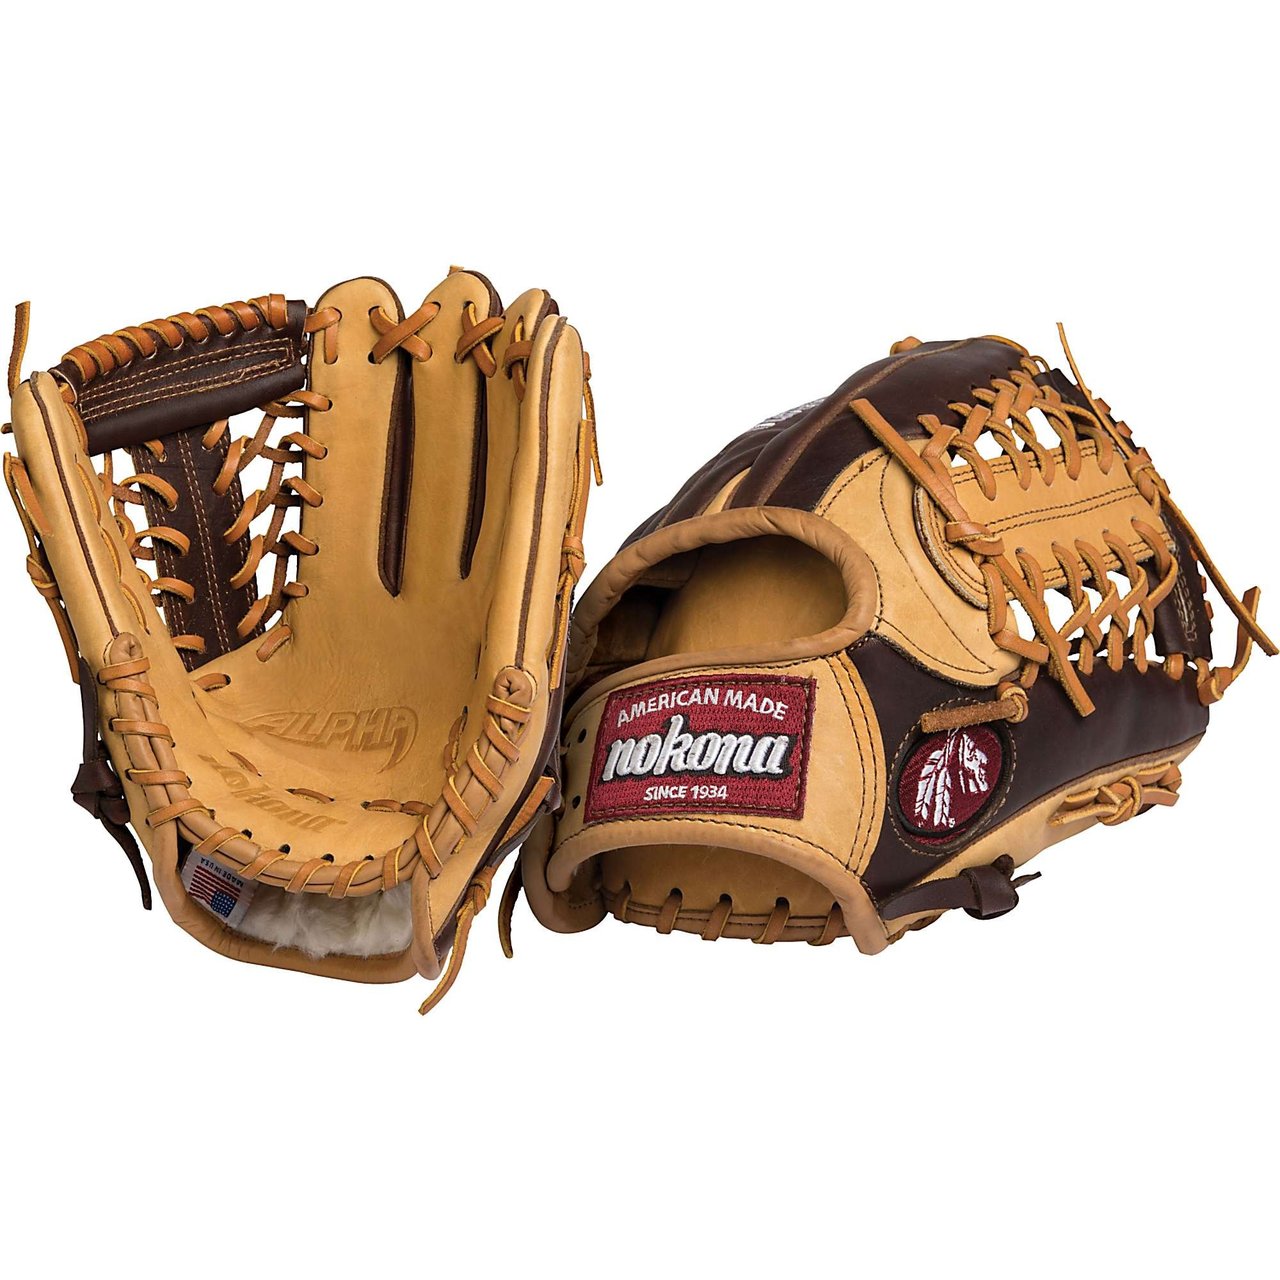 nokona-alpha-ab-1150m-baseball-glove-11-5-inch-right-hand-throw AB-1150M-Right Hand Throw Nokona 808808889304 The Alpha series baseball gloves has been expanded to include our